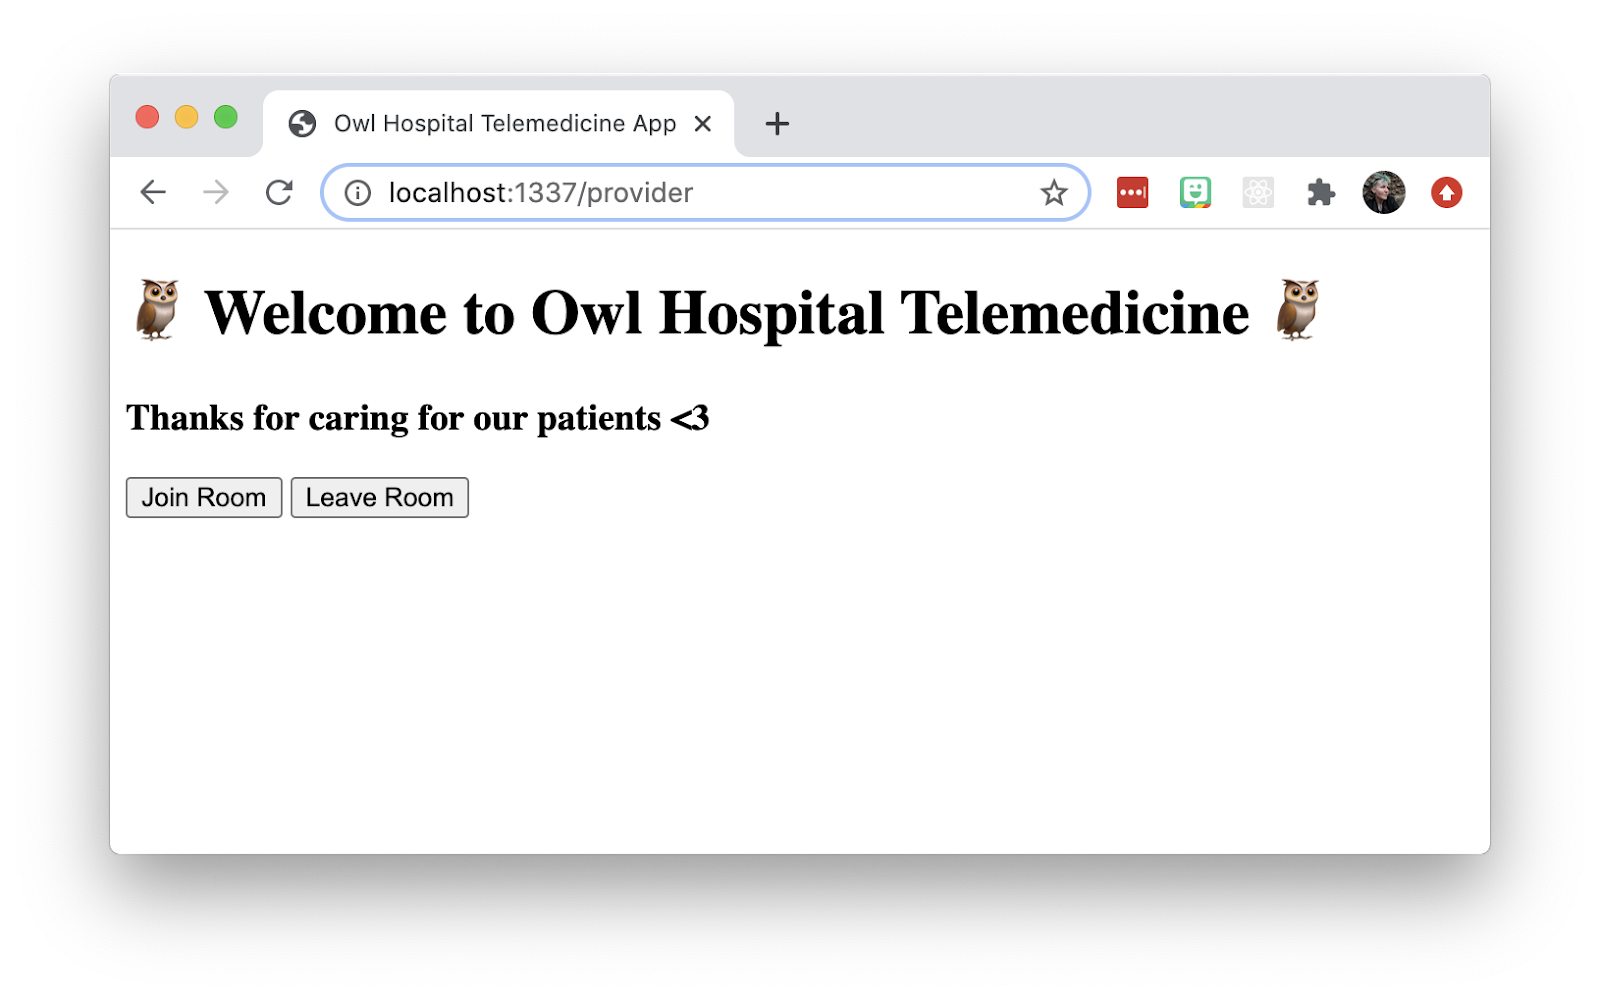 Screenshot of the front end of a telemedicine app. Large text says "Welcome to Owl Hospital Telemedicine." Small text says "Thanks for caring for our patients <3". There are 2 buttons, "Join Room" and "Leave Room". Page has no styling.